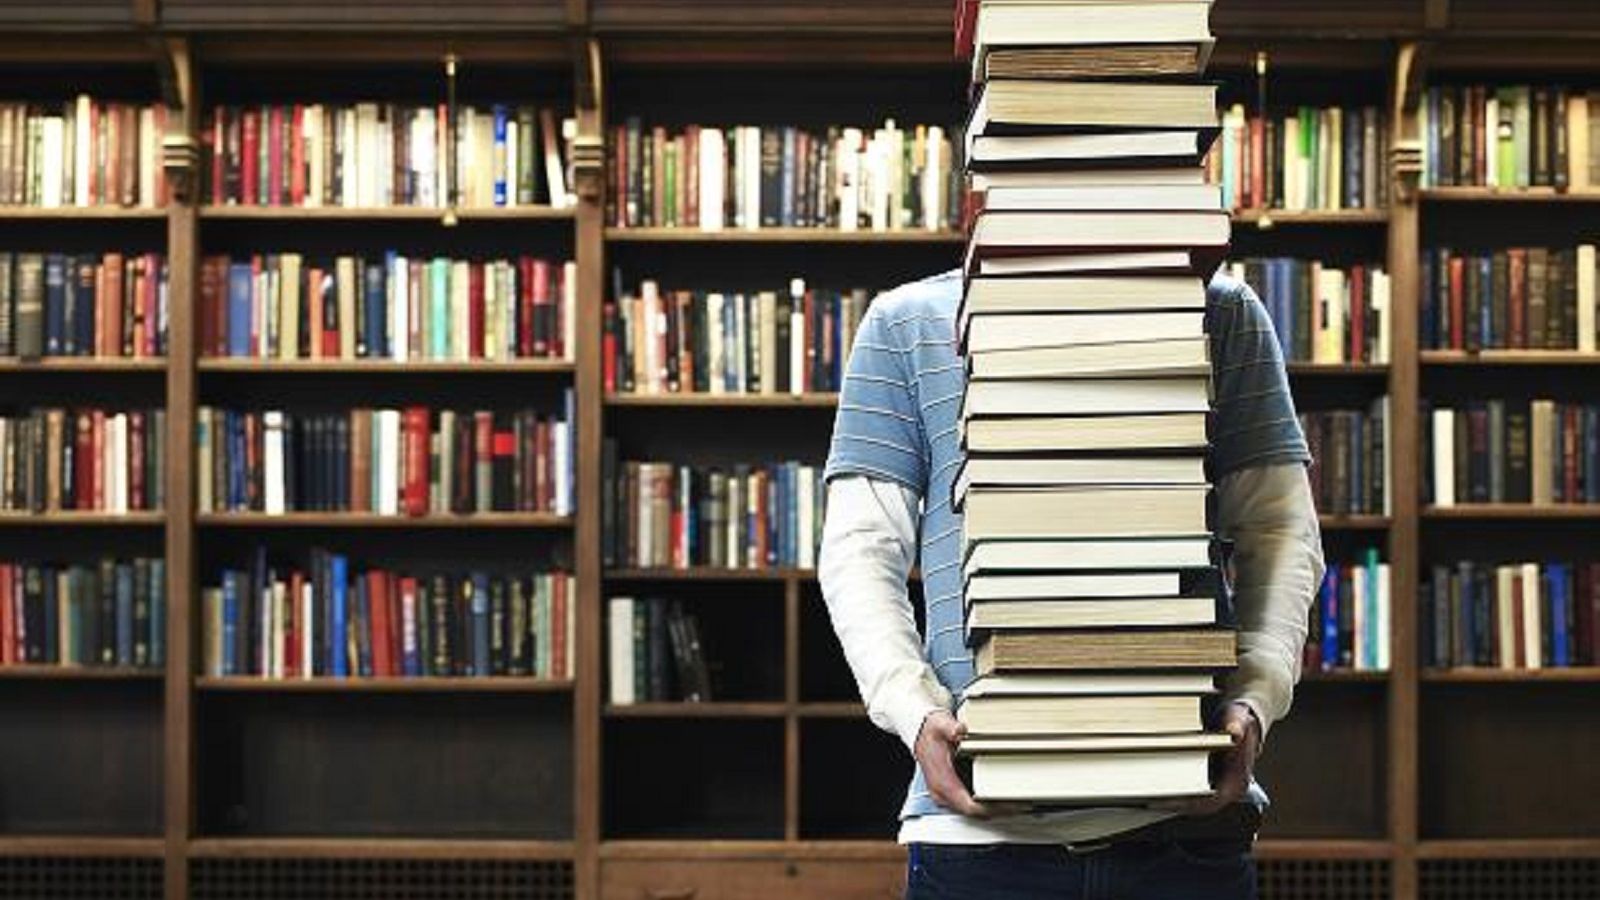 Image of a person holding a pile of books